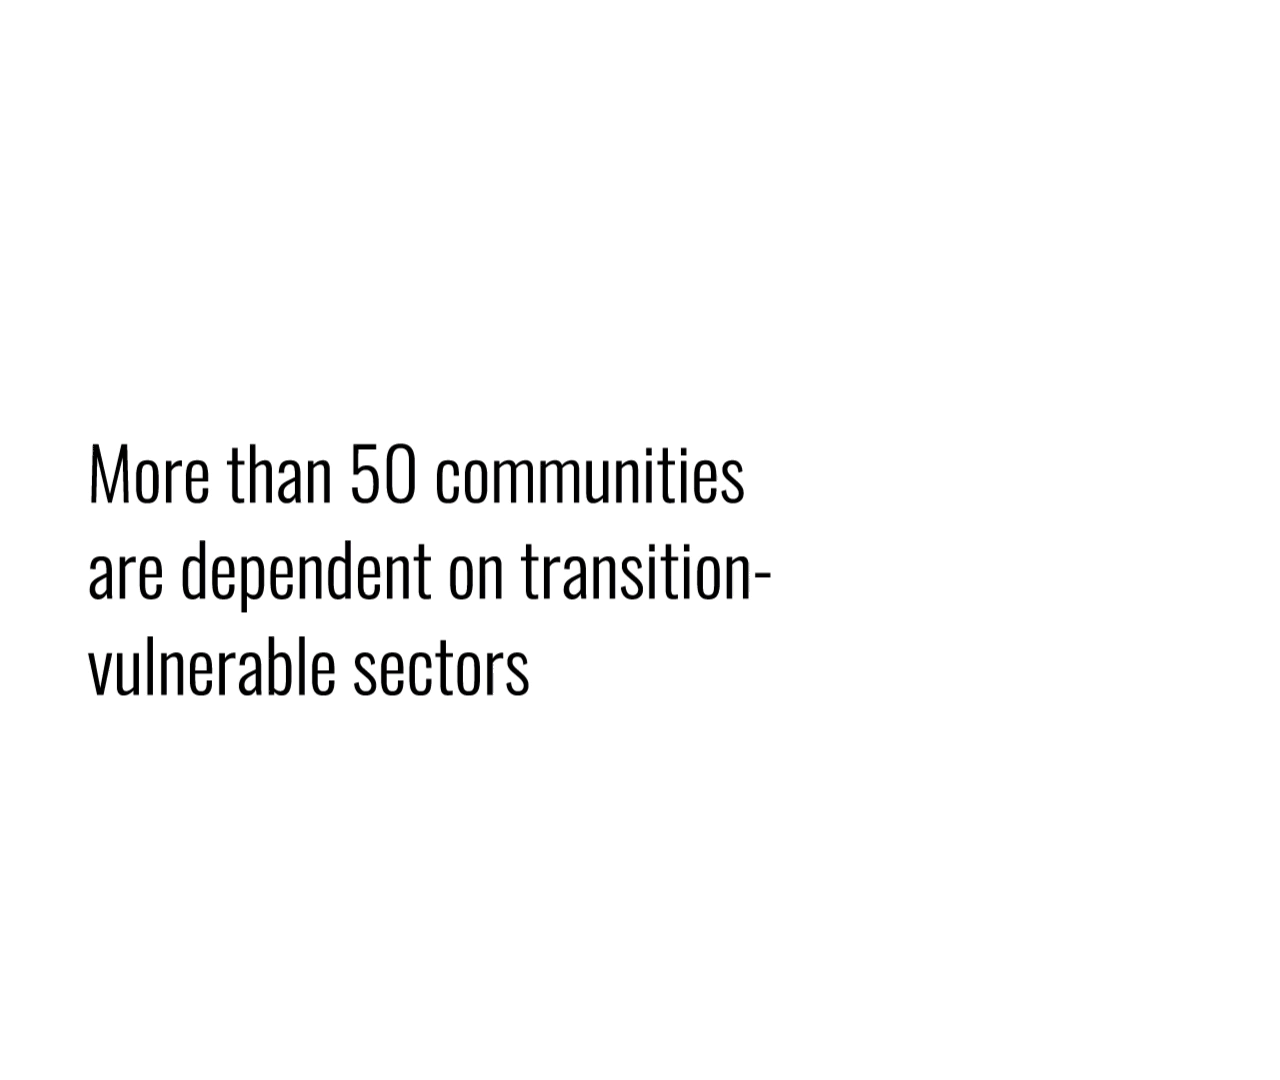 The animated version of this graphic shows over 50 communities that depend on sectors vulnerable to transition. Illustrated as stars, they are animated and placed on the graph. The graph breaks down the data into six provinces.